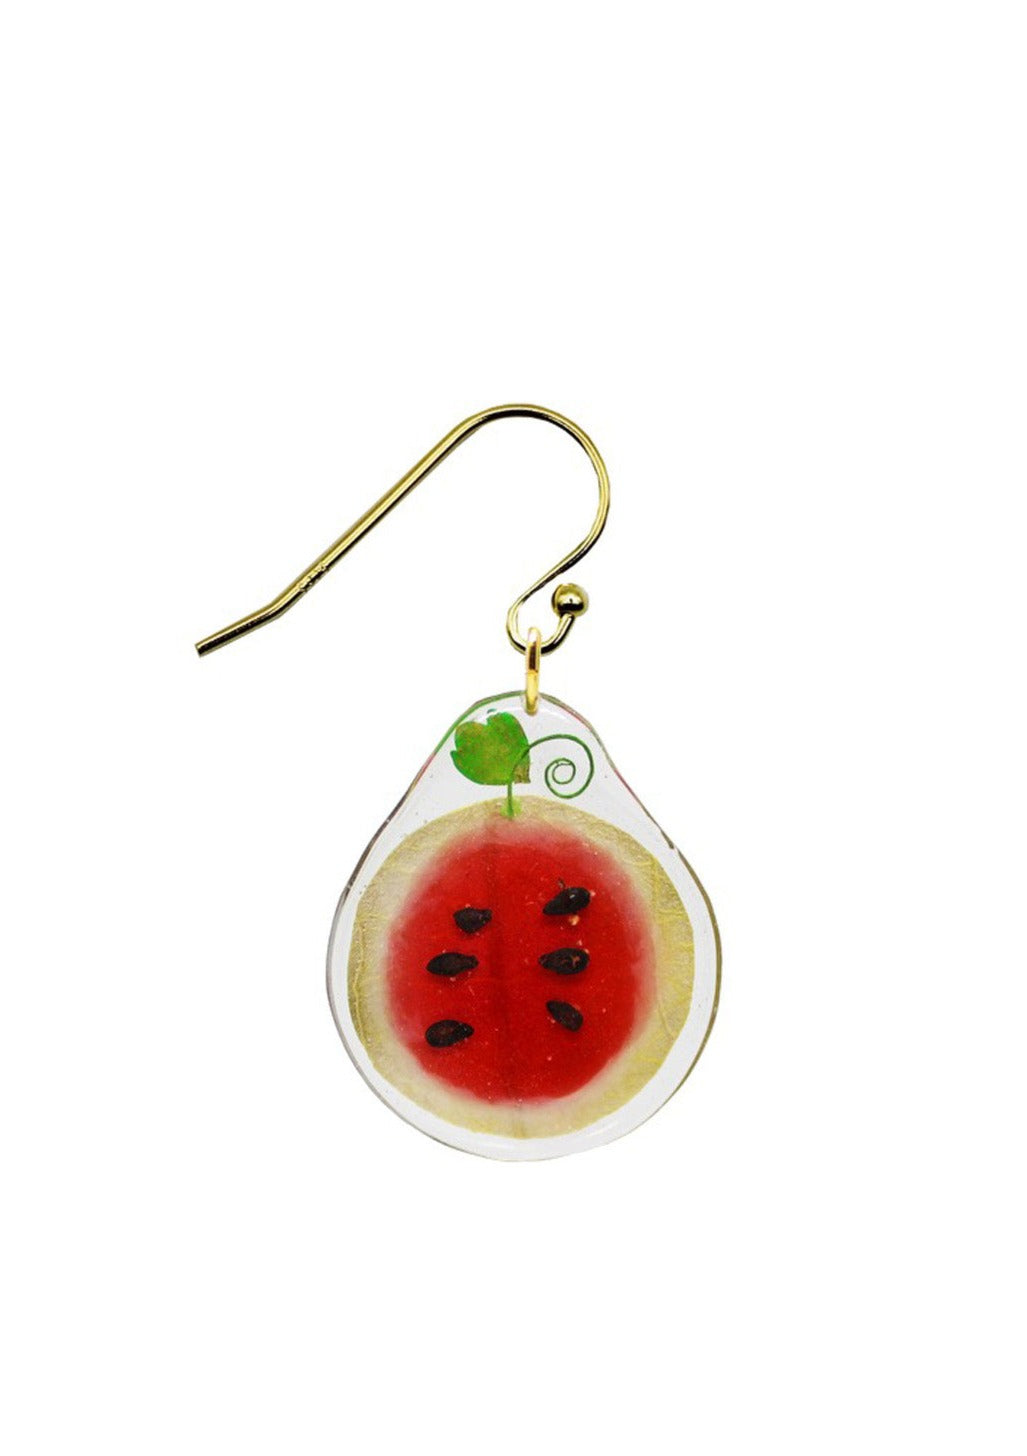 Resin Coated Itty Bitty Miniature Watermelon Round sliced in half on French Hook Earring